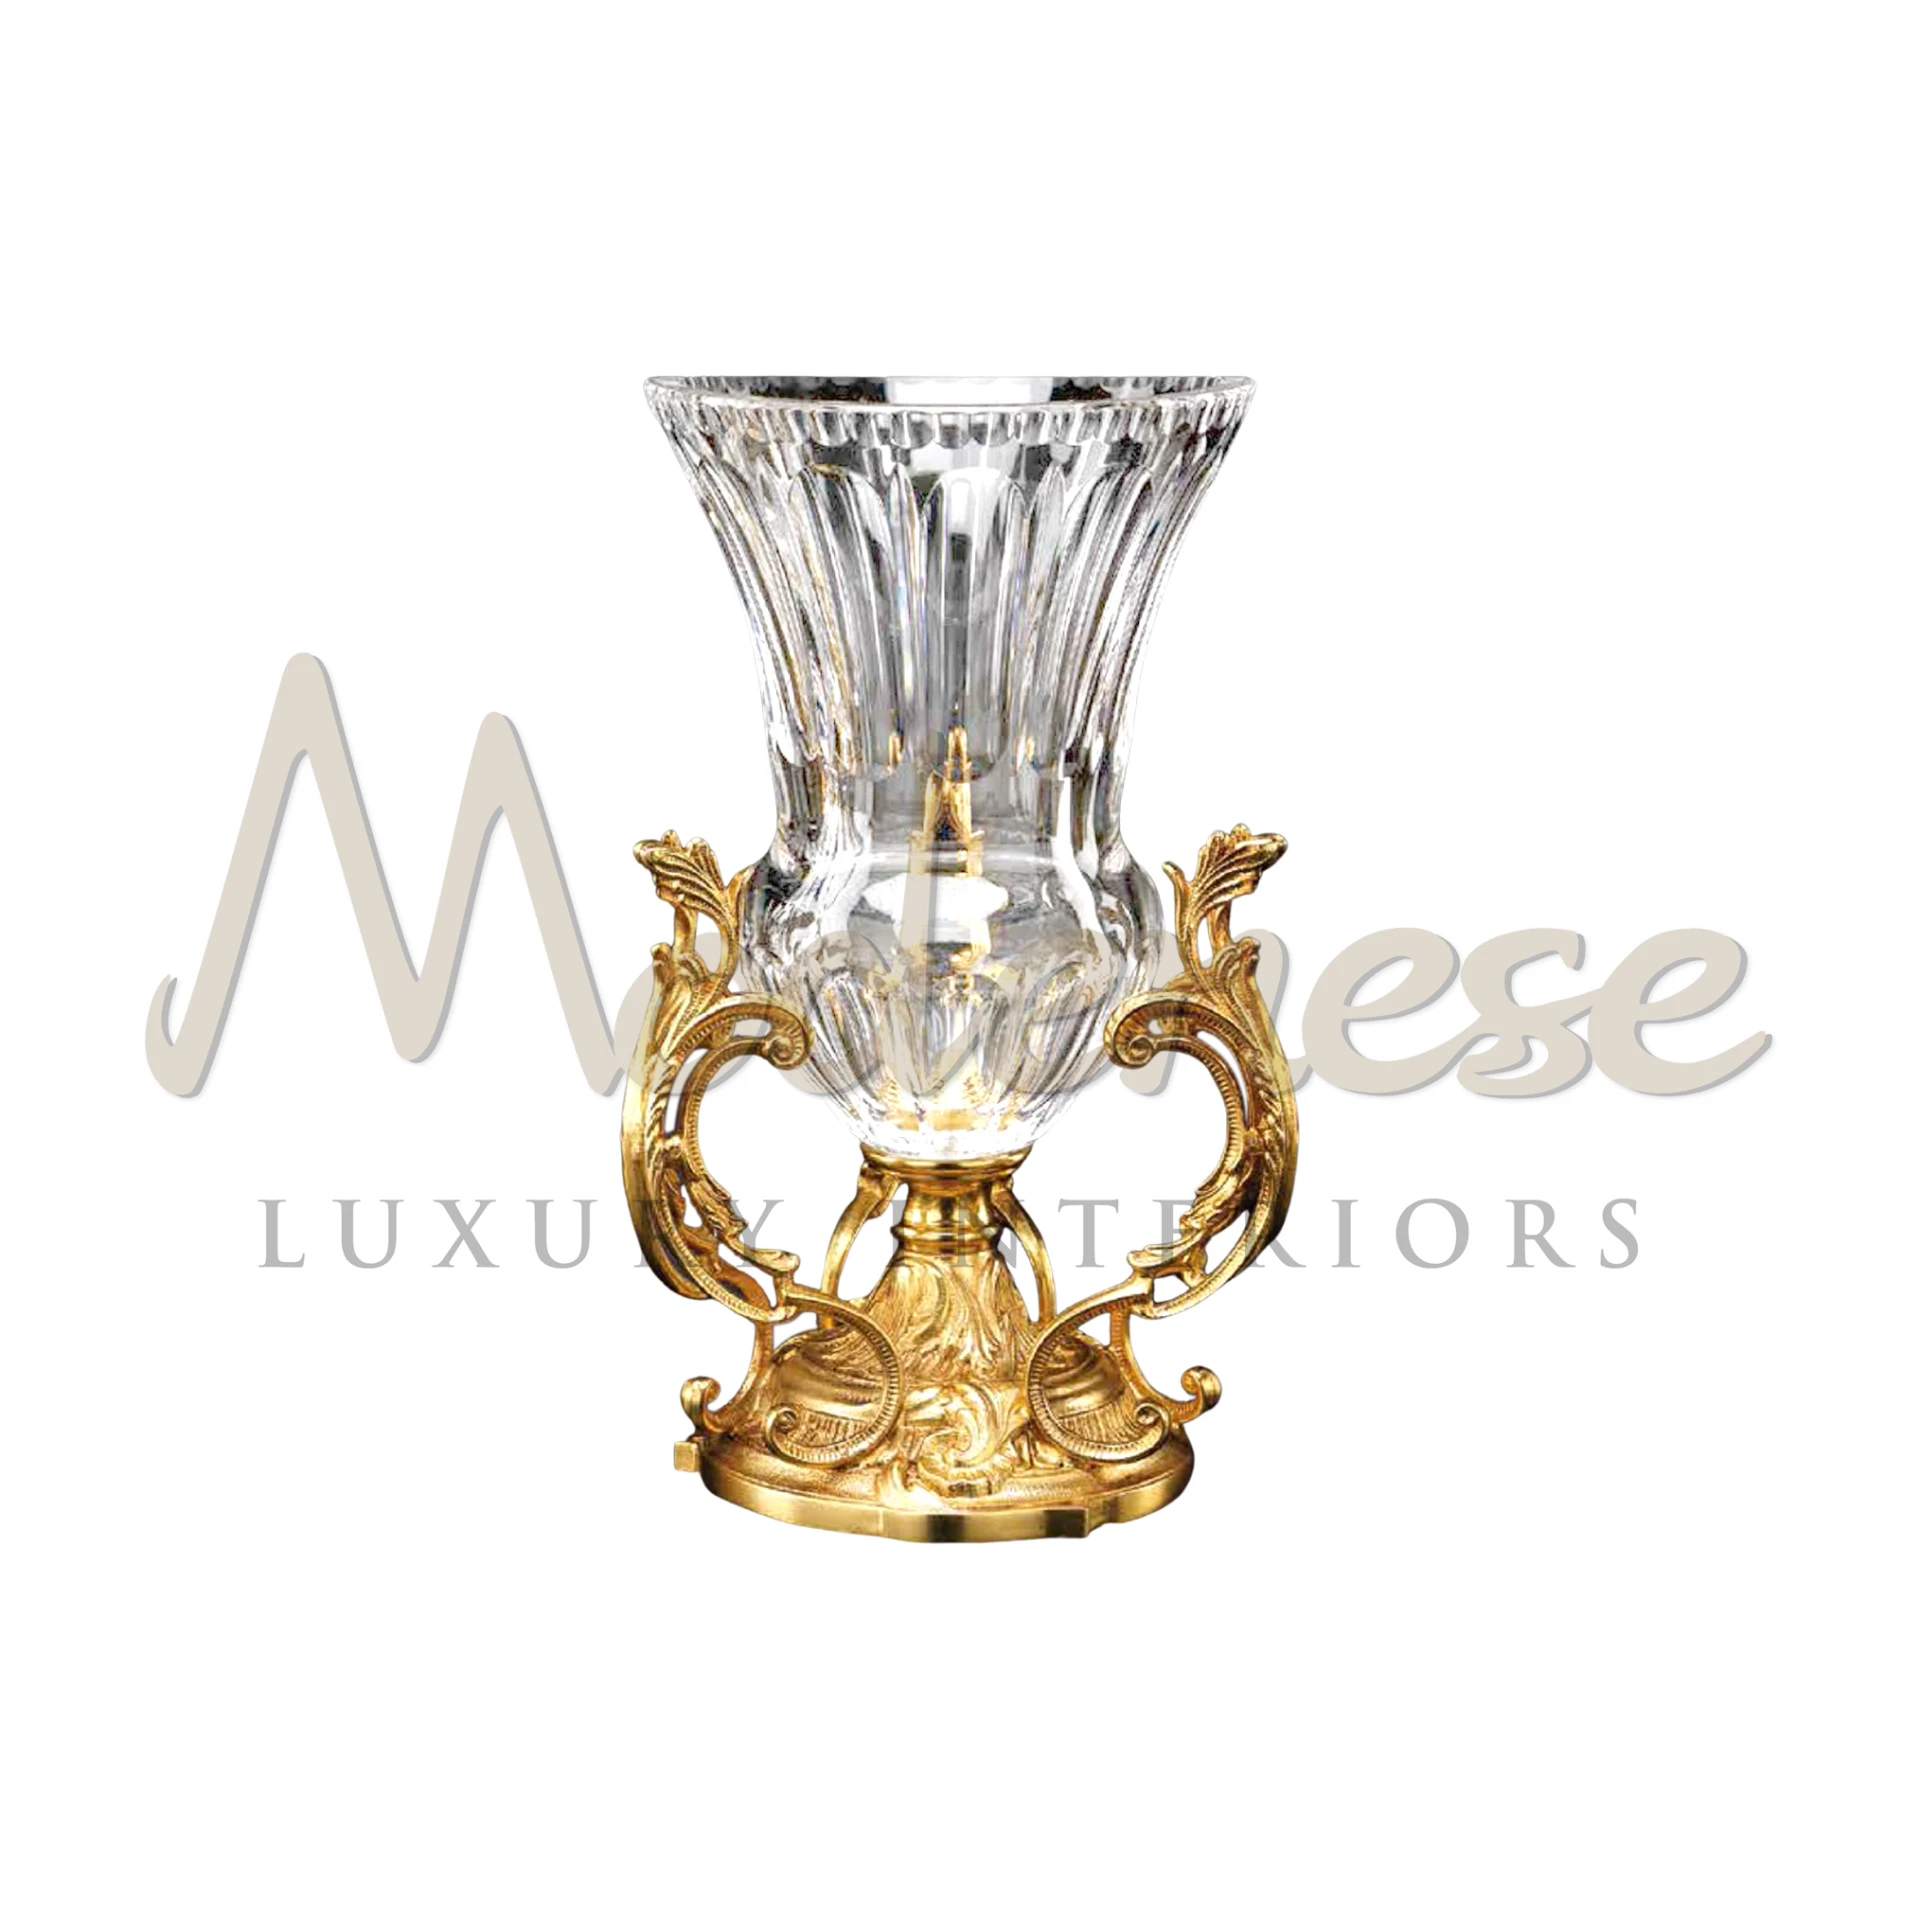 Victorian Italian vase with ornate scrollwork, embodying the luxury and sophistication of Victorian and Italian designs.